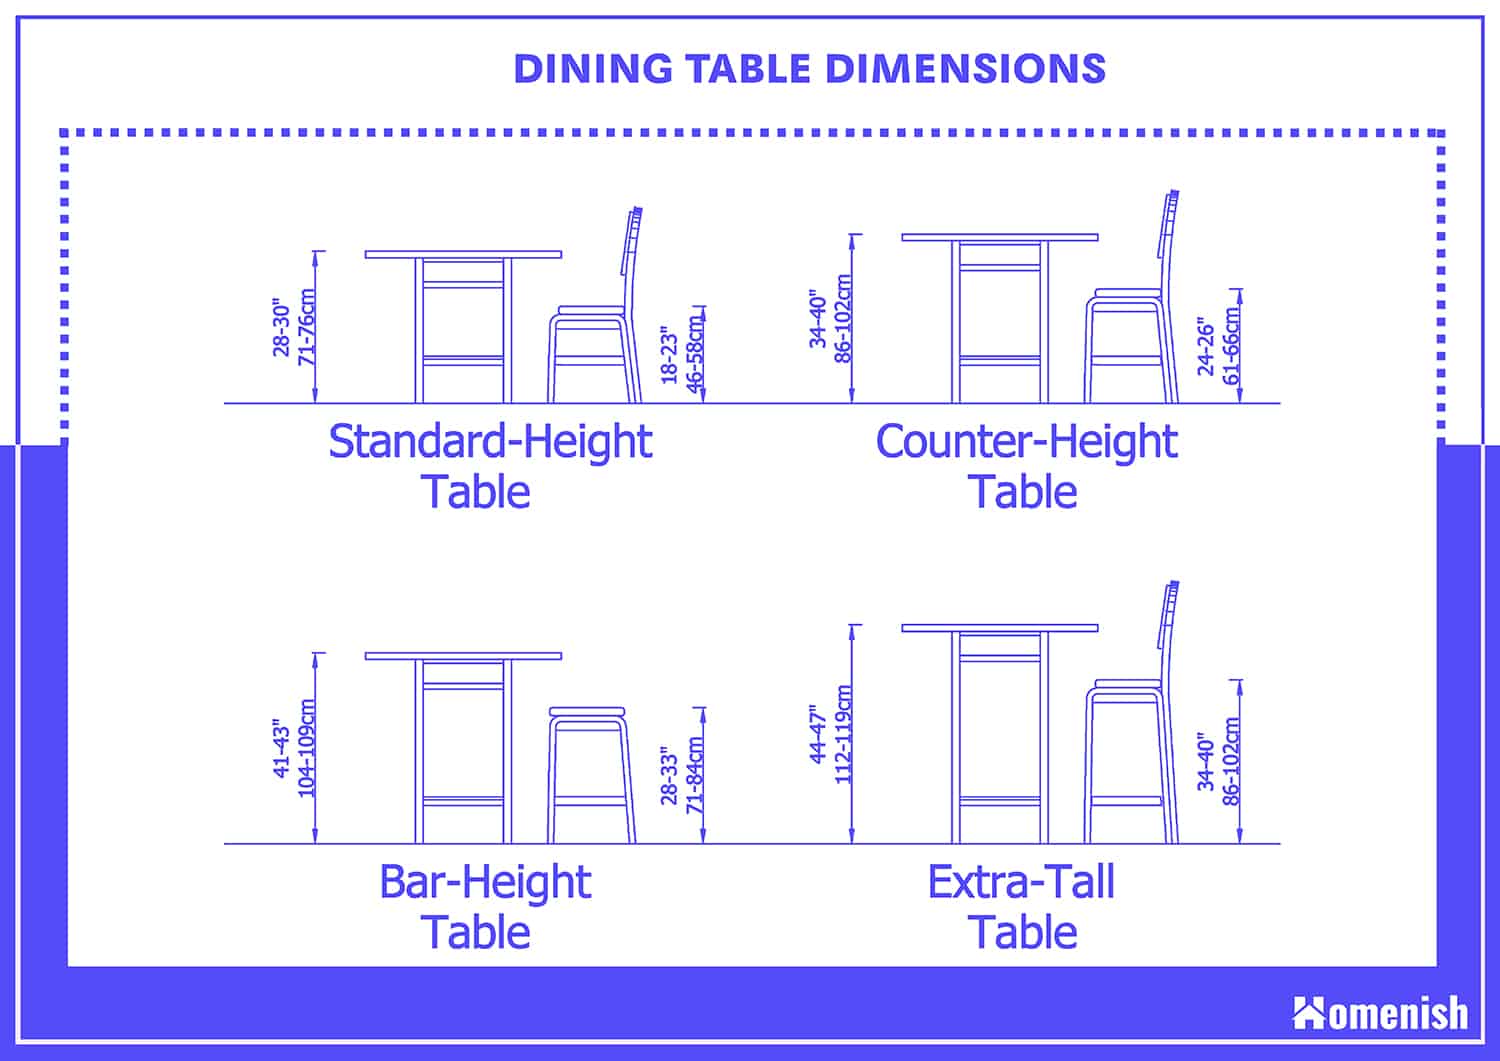 Standard Dining Table Dimensions, Standard Dining Room Table Size For 6 Person